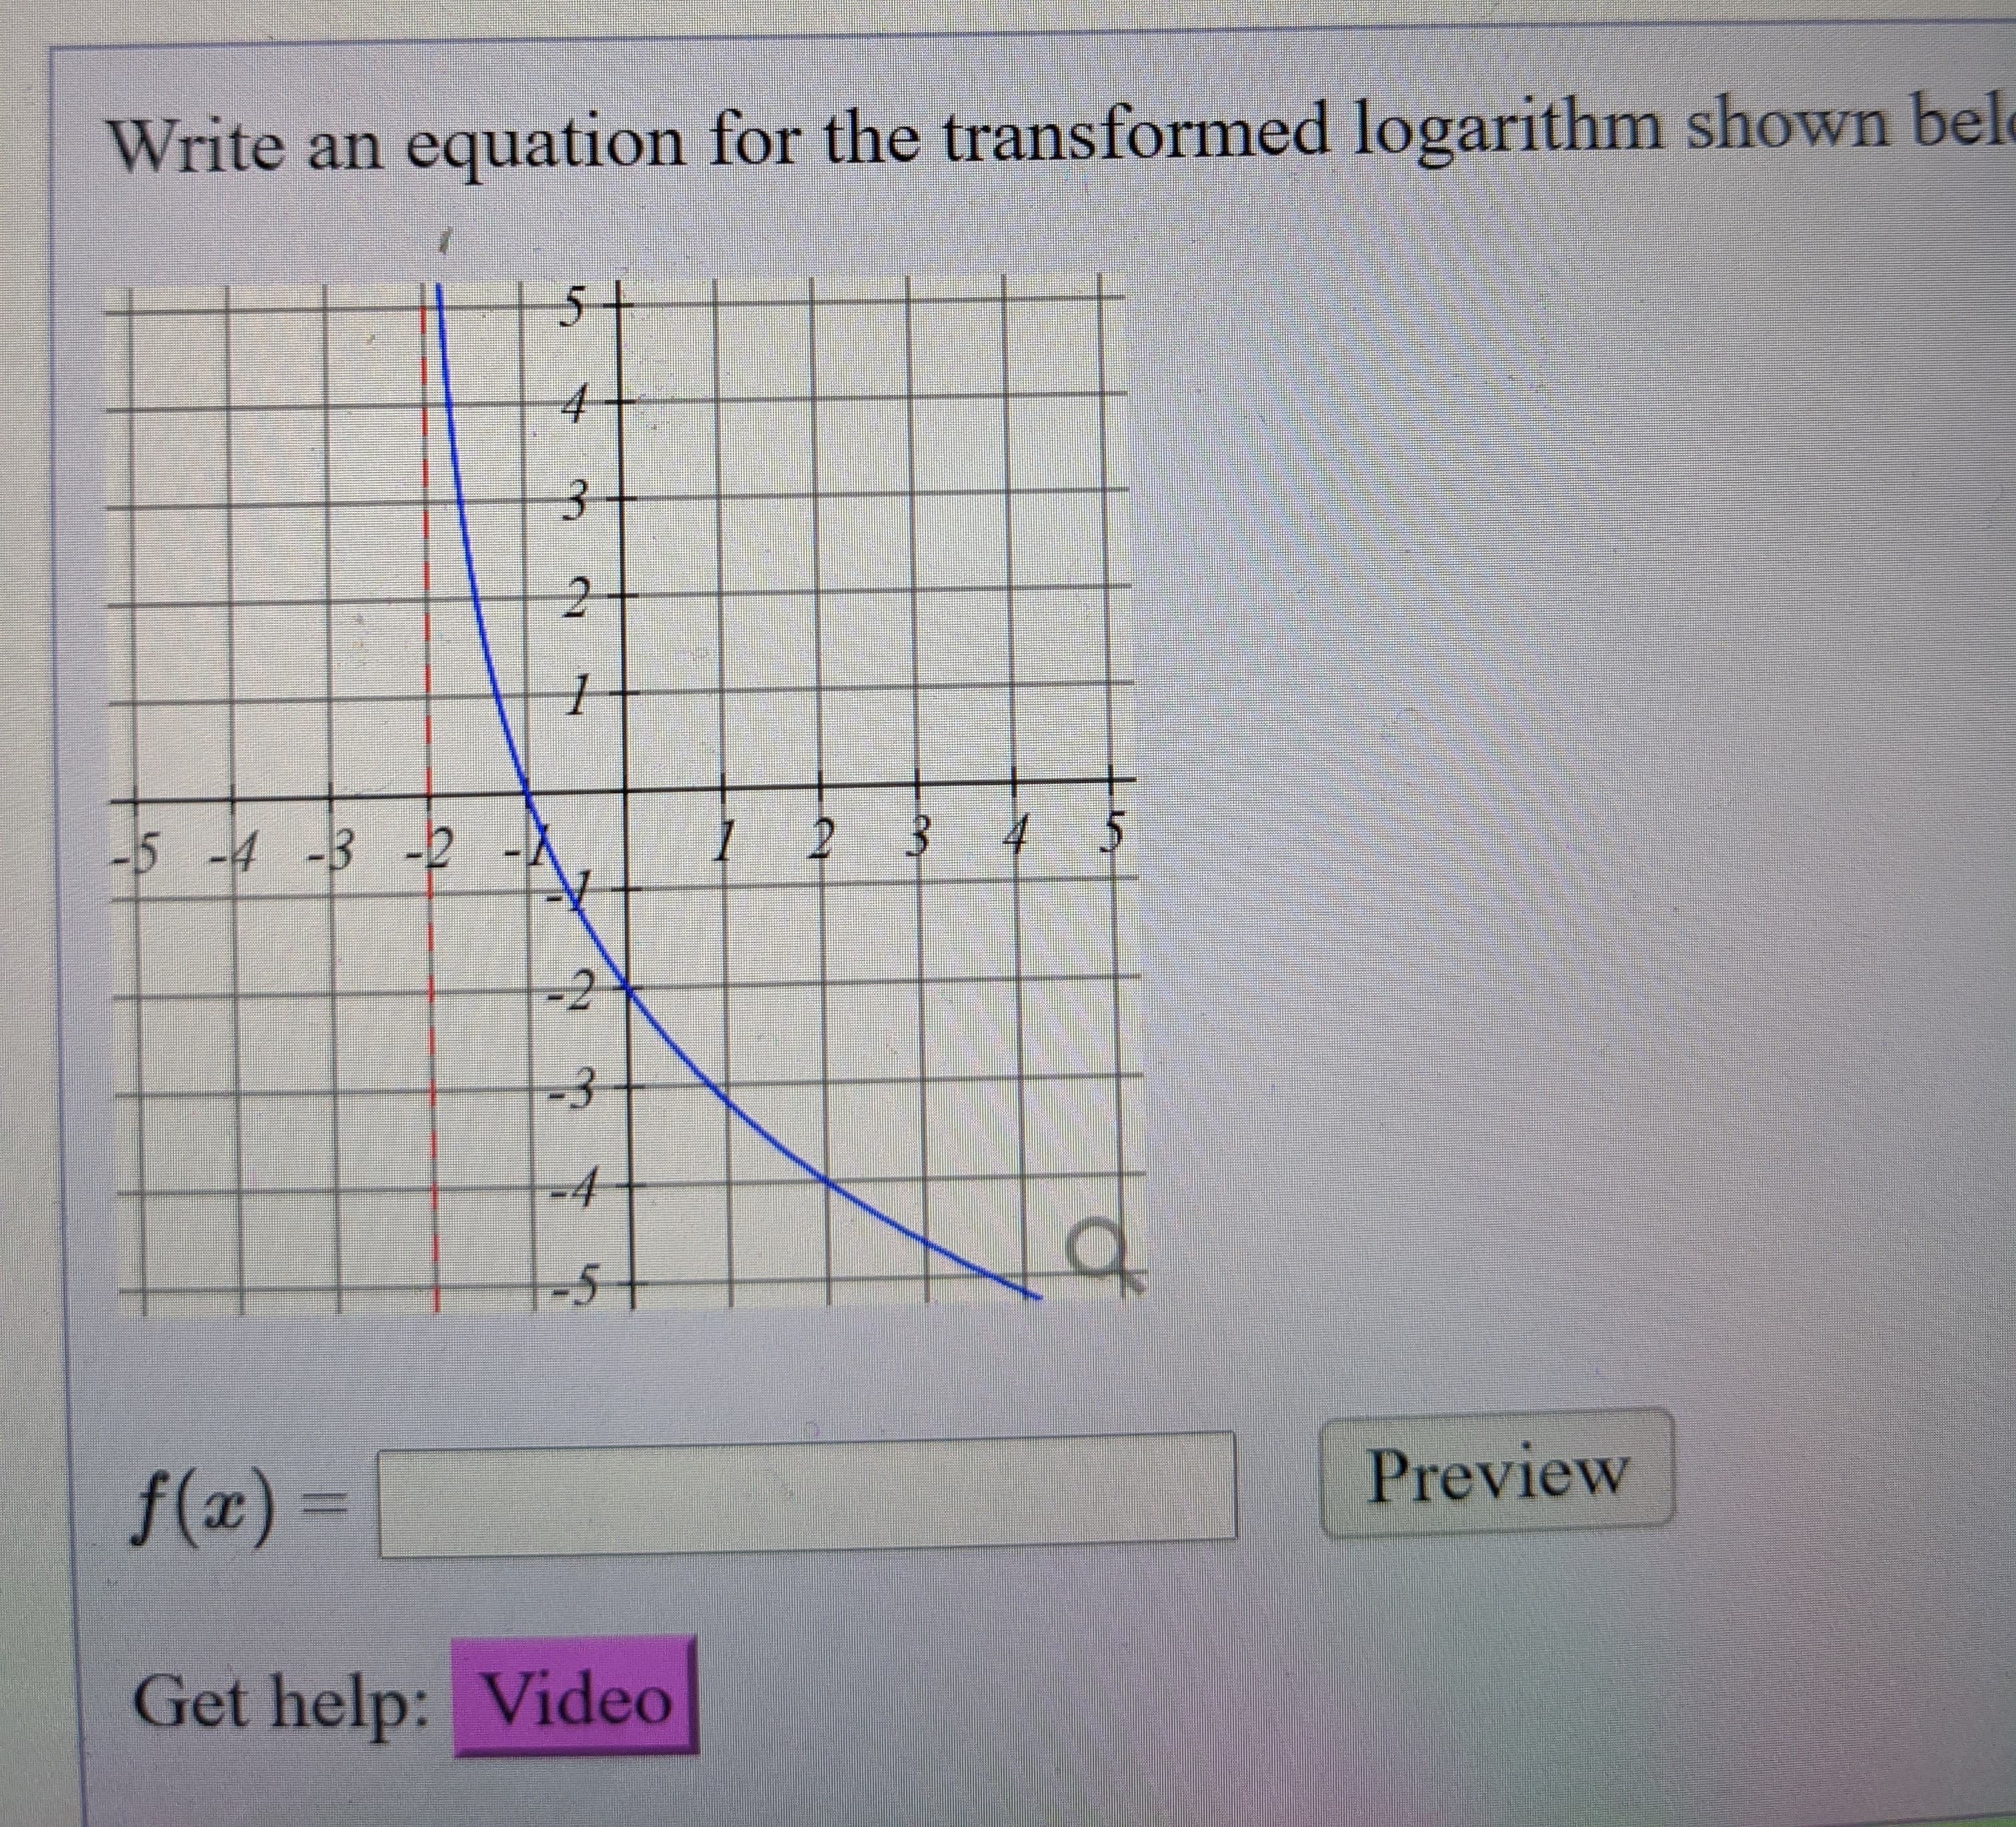 Write an equation for the transformed logarithm
